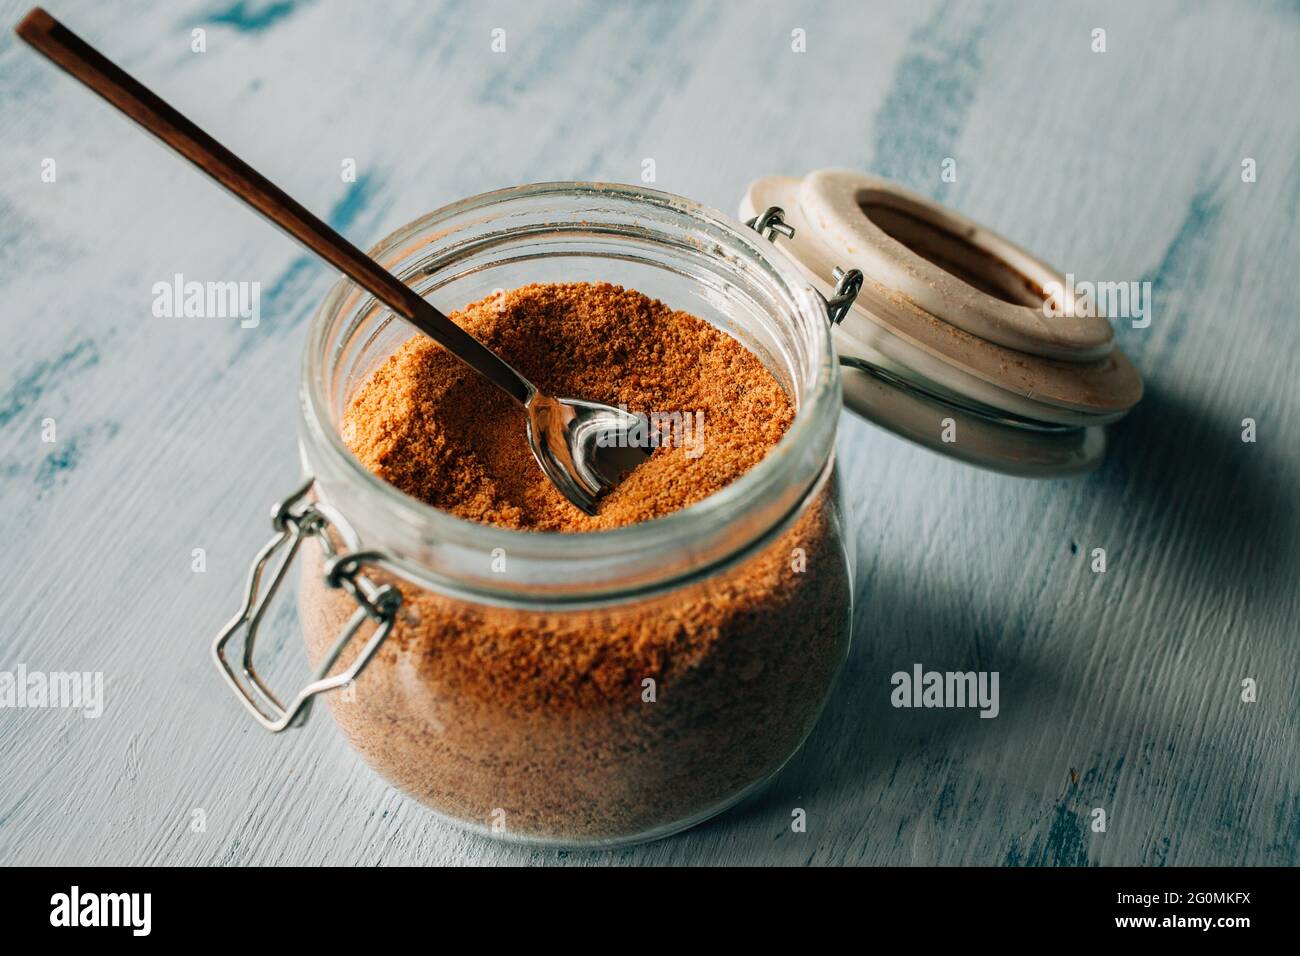 Panela sugar background. Close up view of raw cane sugar in a jar. Stock Photo